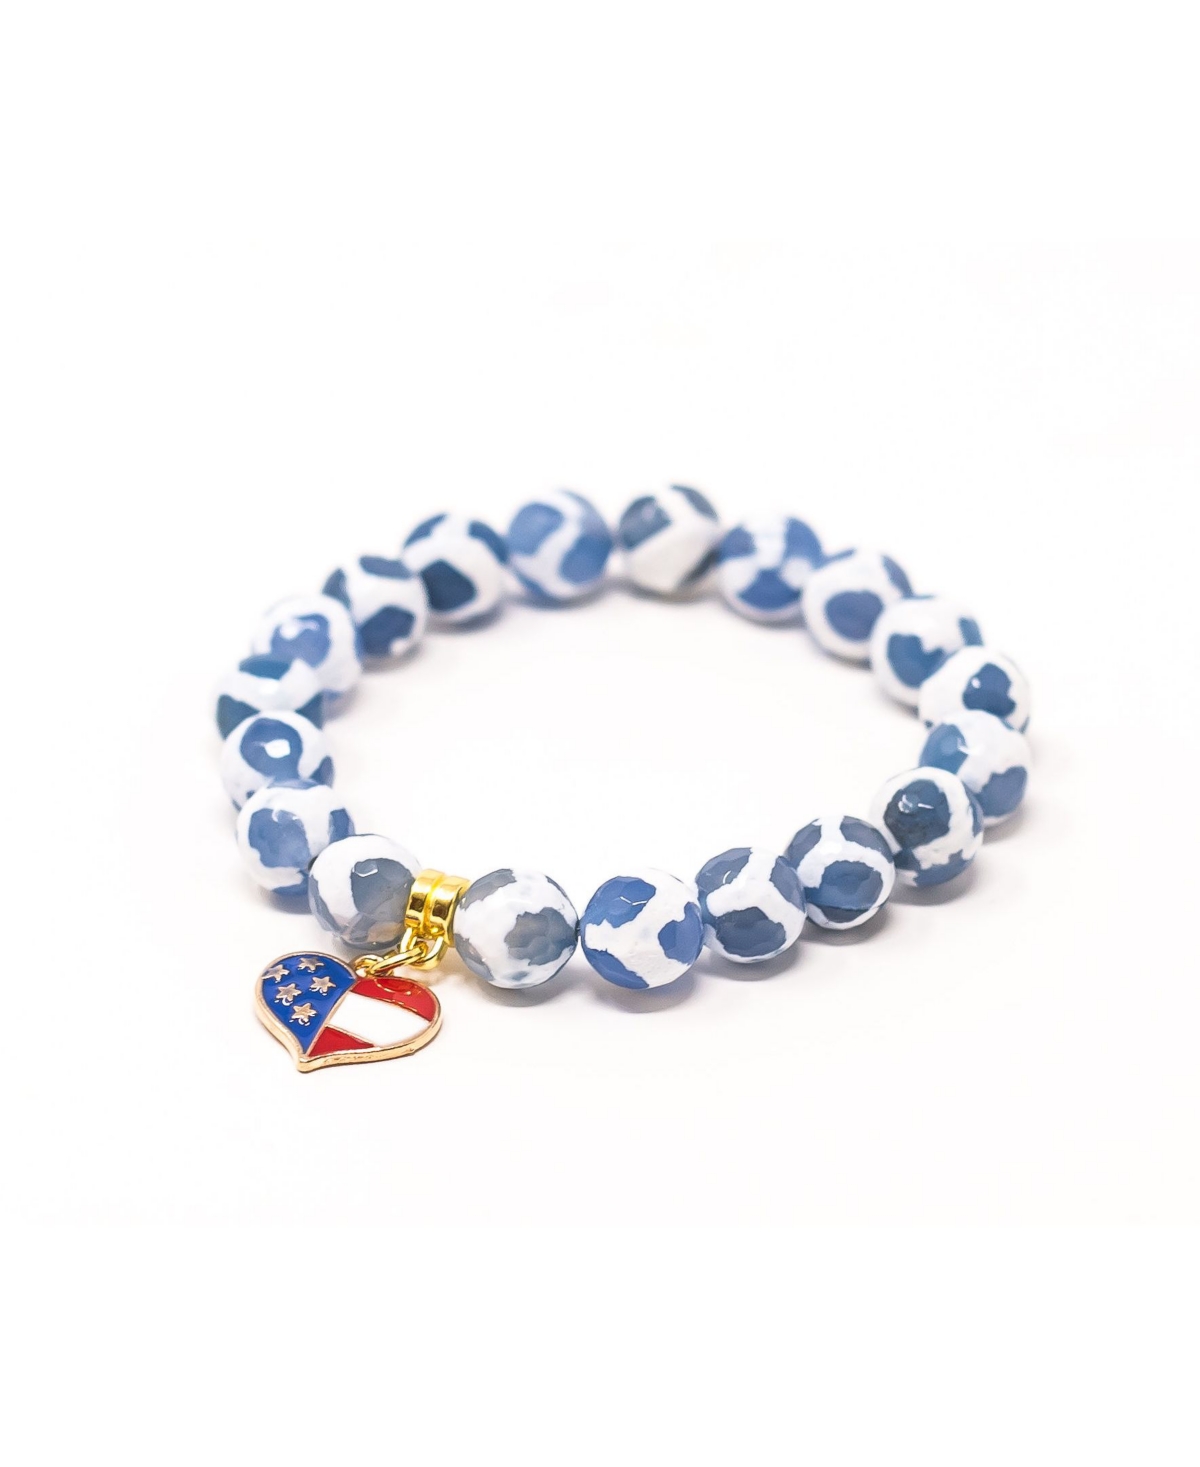 Tibetan Agate Stars and Stripes Star Give Back Collection Bracelet - Blue